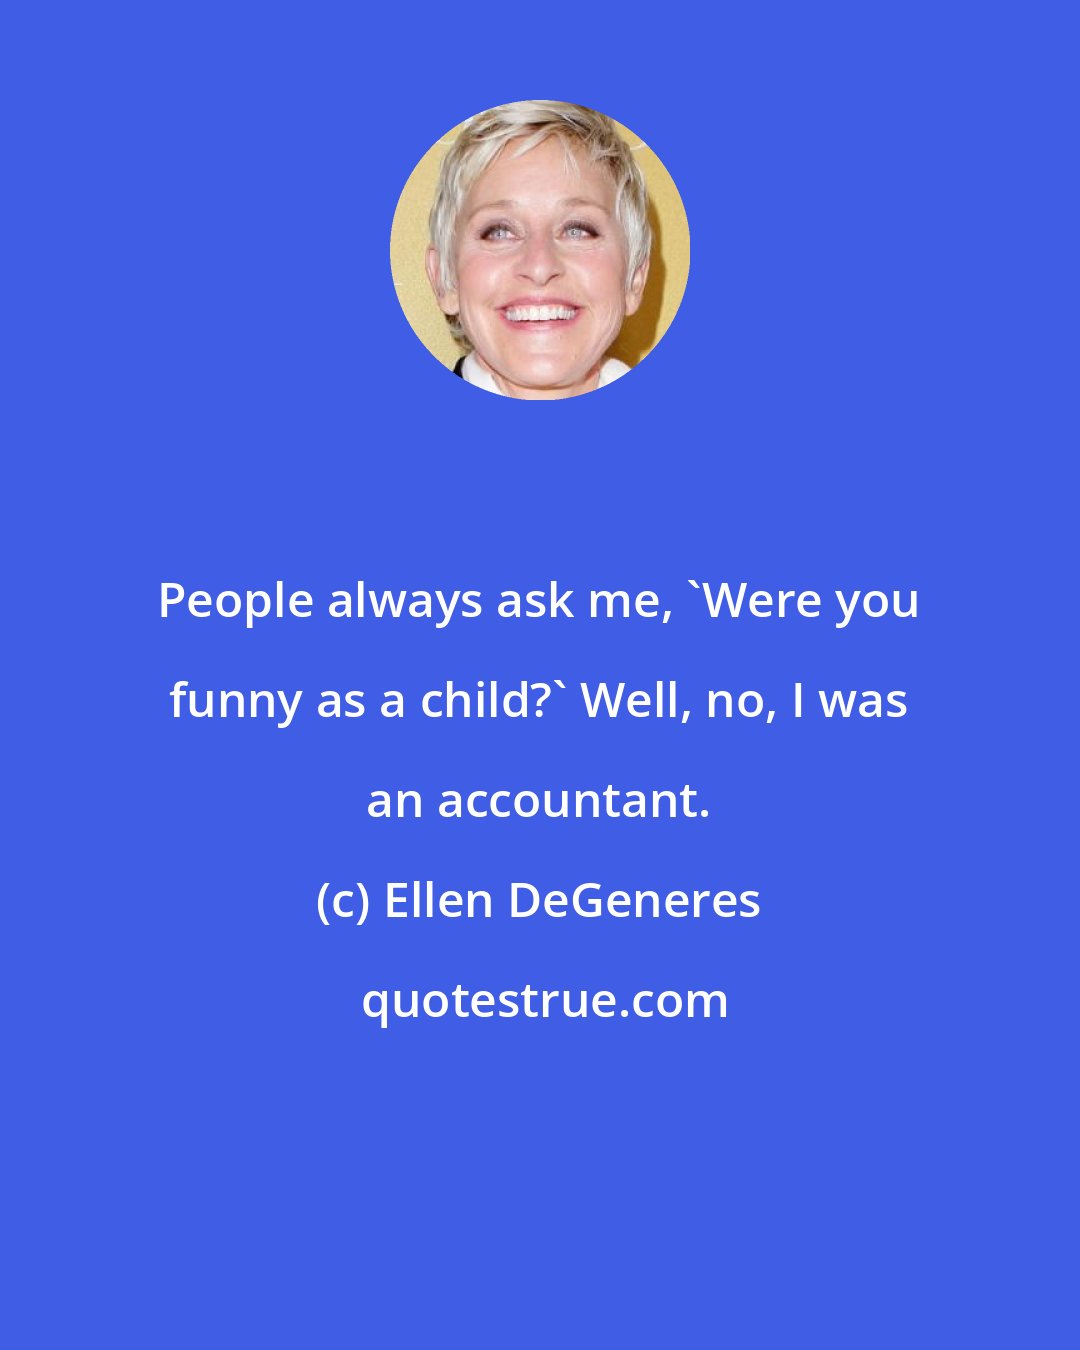 Ellen DeGeneres: People always ask me, 'Were you funny as a child?' Well, no, I was an accountant.